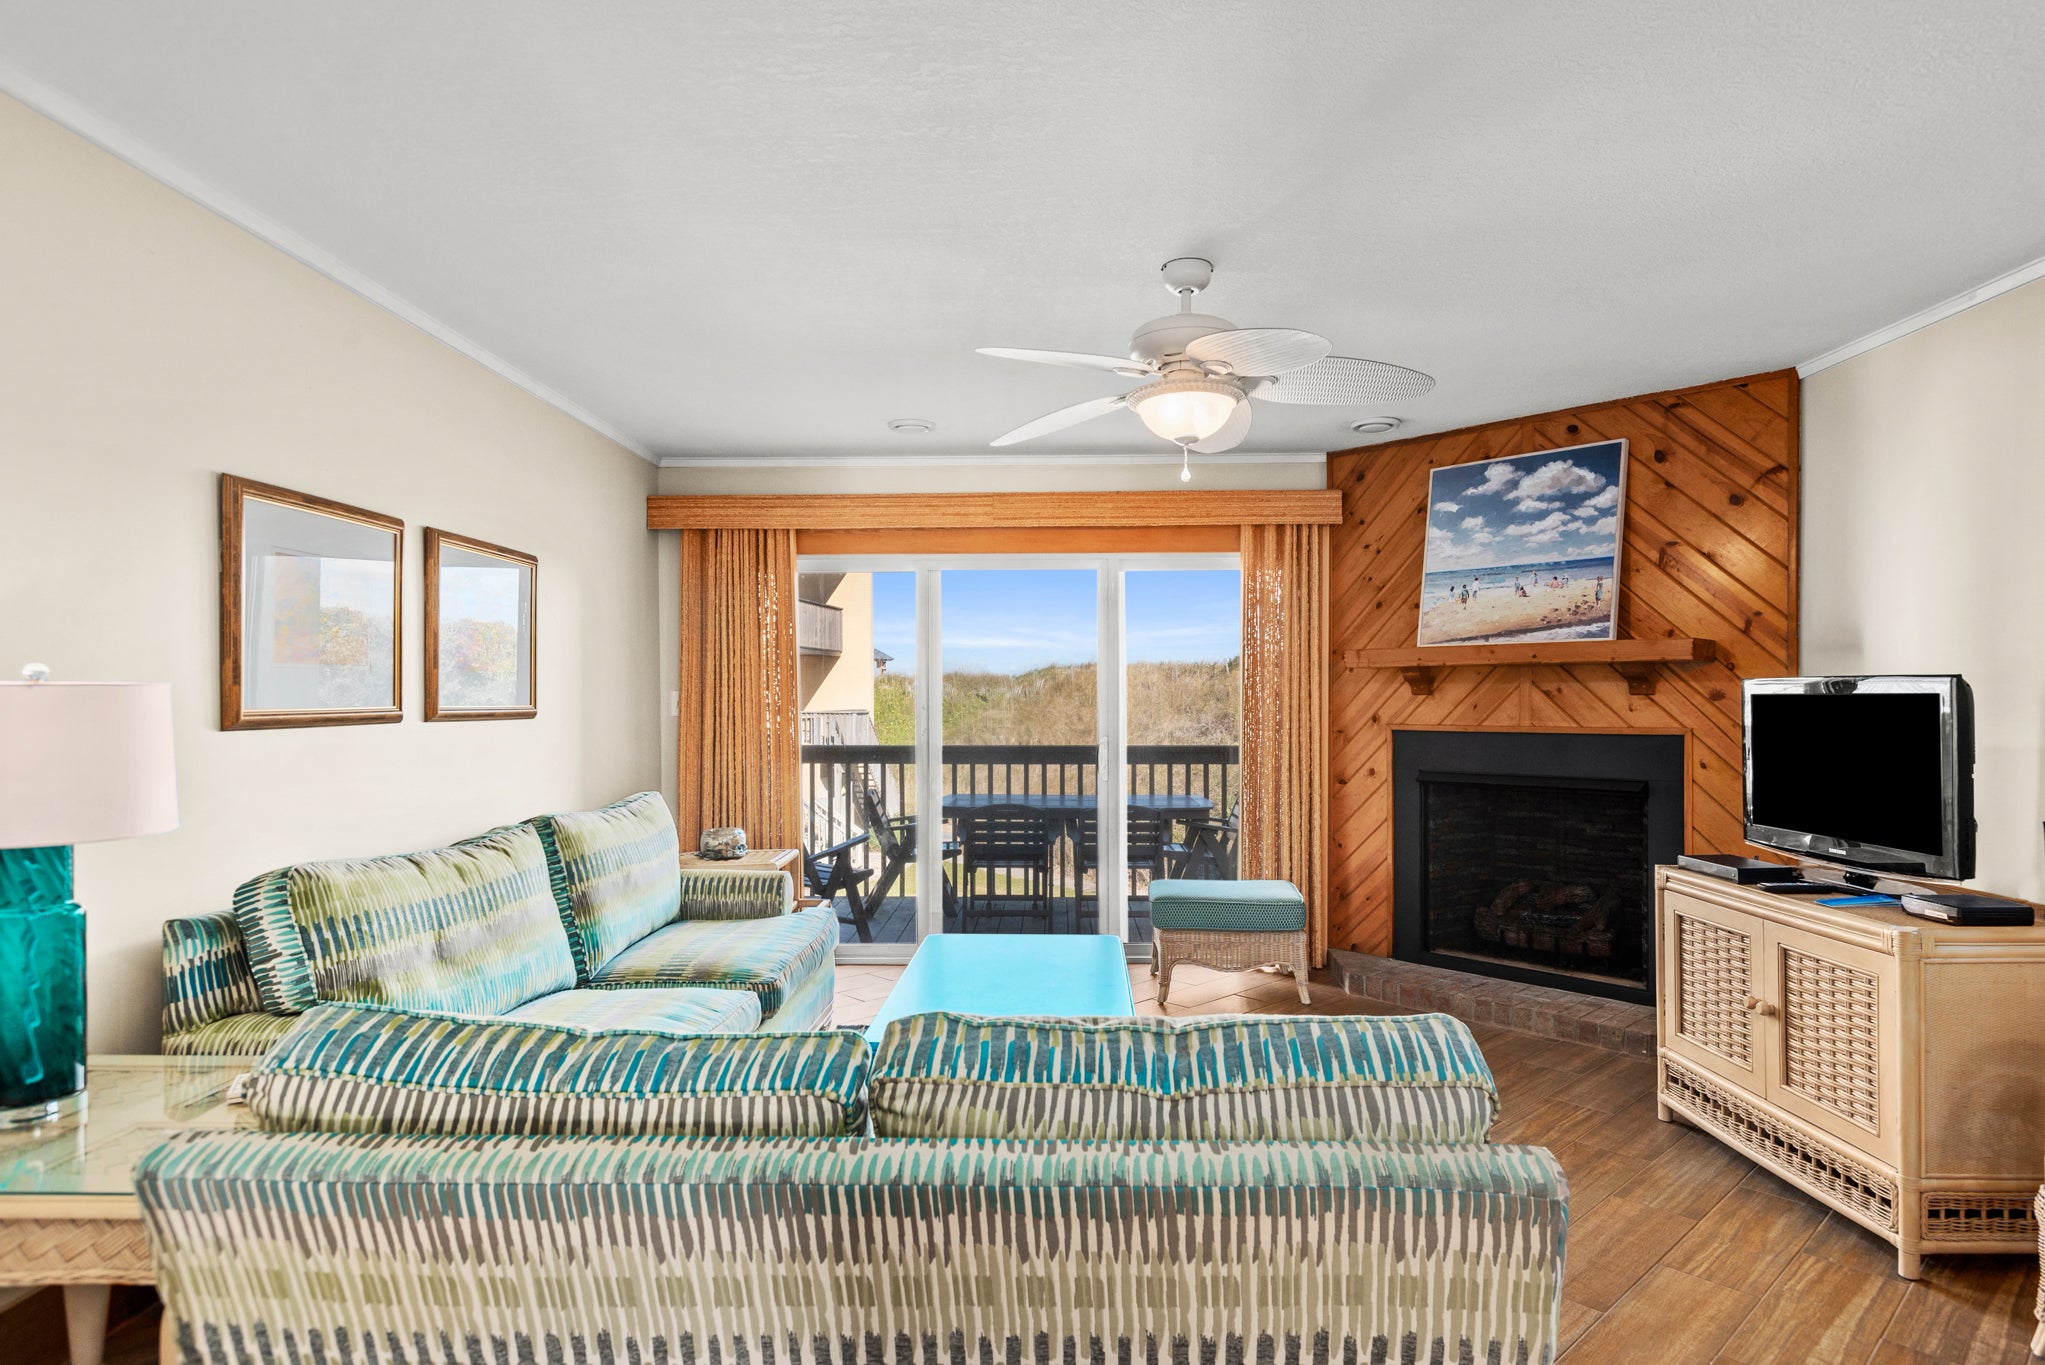 QC4: Trip's OBX | Mid Level Living Area - Fireplace Not Available For Guest Use